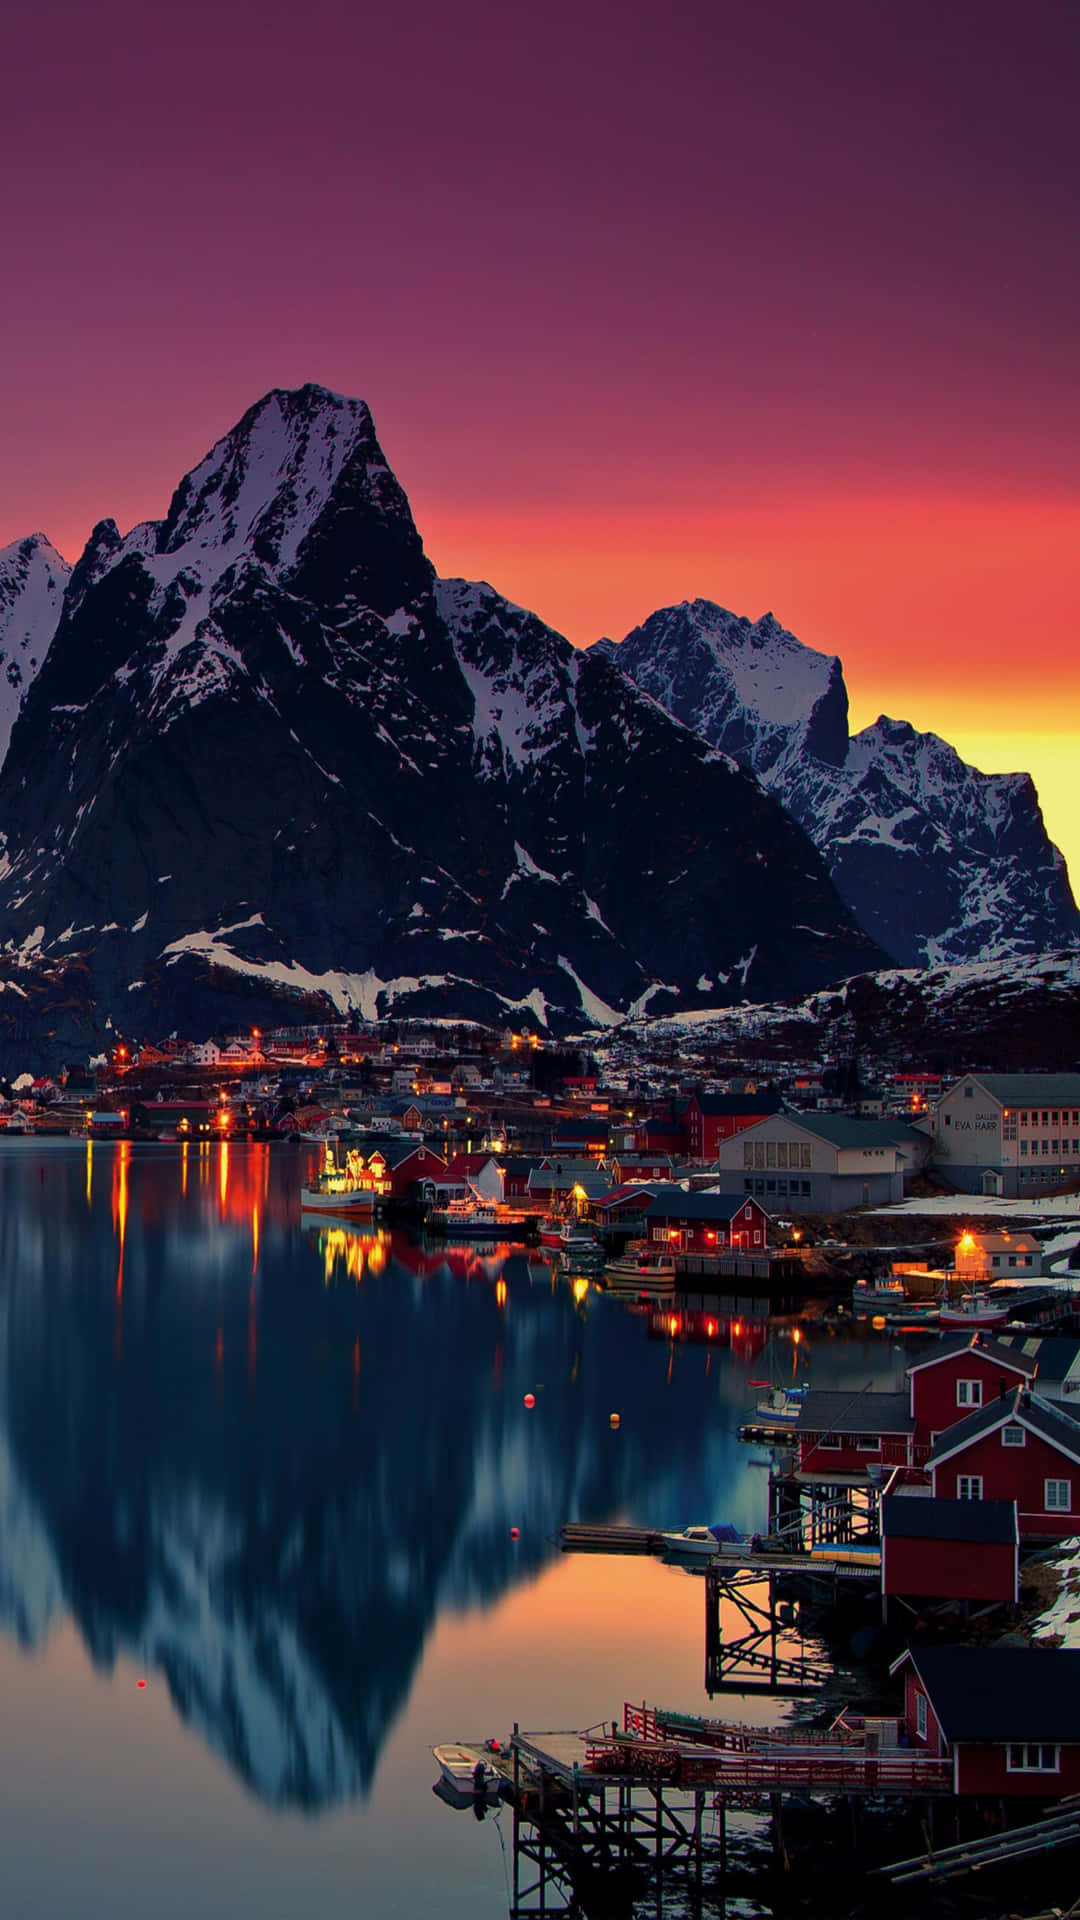 "Take in the picturesque views of Norway!"